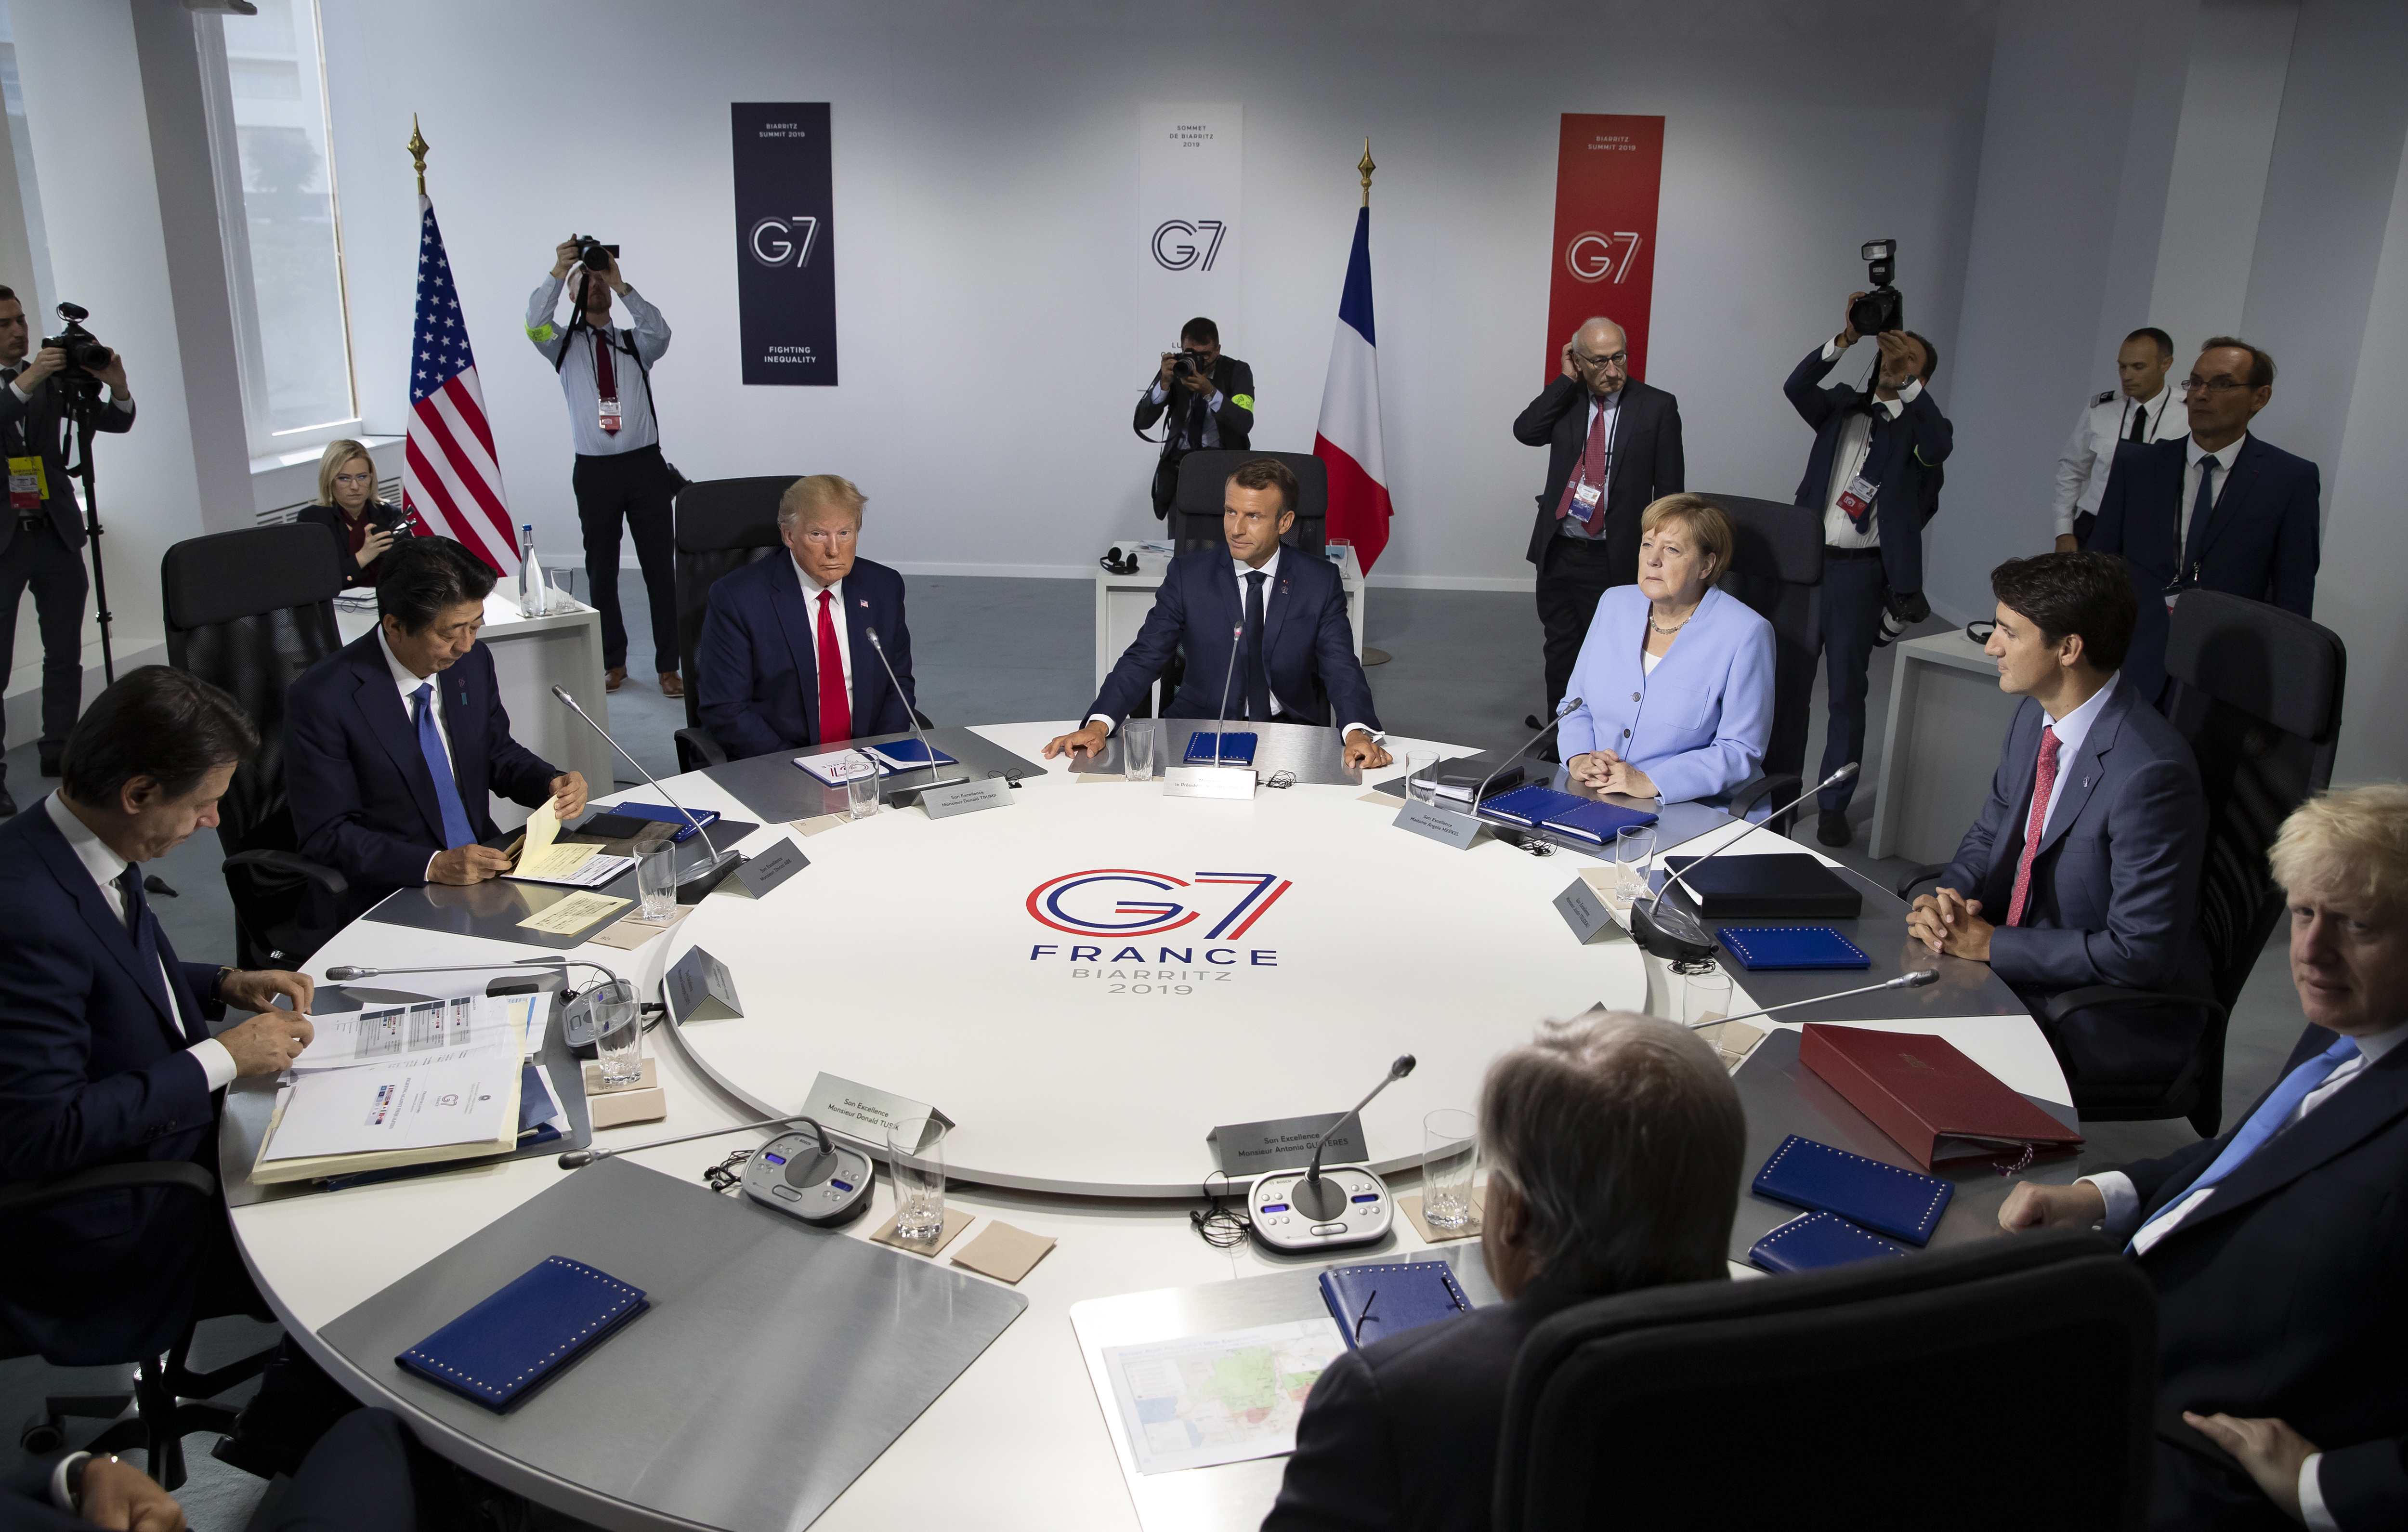 From the left, Italian Prime Minister, Giuseppe Conte, Japanese Prime Minister Shinzo Abe, U.S President Donald Trump, French President Emmanuel Macron, German Chancellor Angela Merkel, Canadian Prime Minister Justin Trudeau, Britain's Prime Minister Boris Johnson attend a work session during the G7 summit at Casino in Biarritz, southwestern France, Monday Aug.26 2019. G-7 leaders are wrapping up a summit dominated by tensions over U.S. trade policies and a surprise visit by Iran's top diplomat. (Ian Langsdon, Pool via AP)